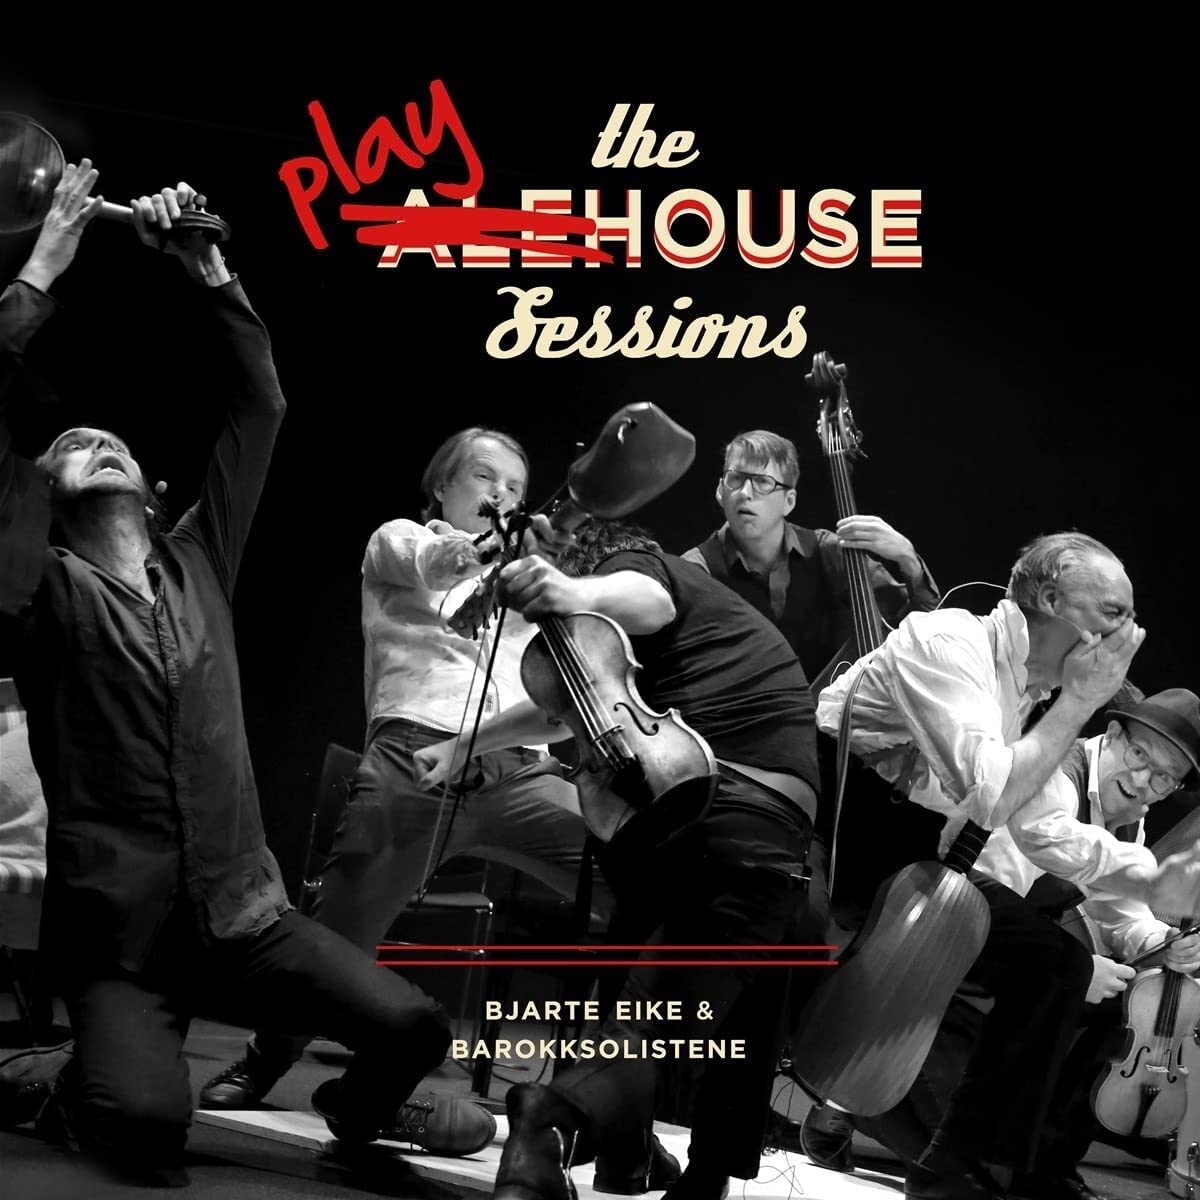 Playhouse Sessions